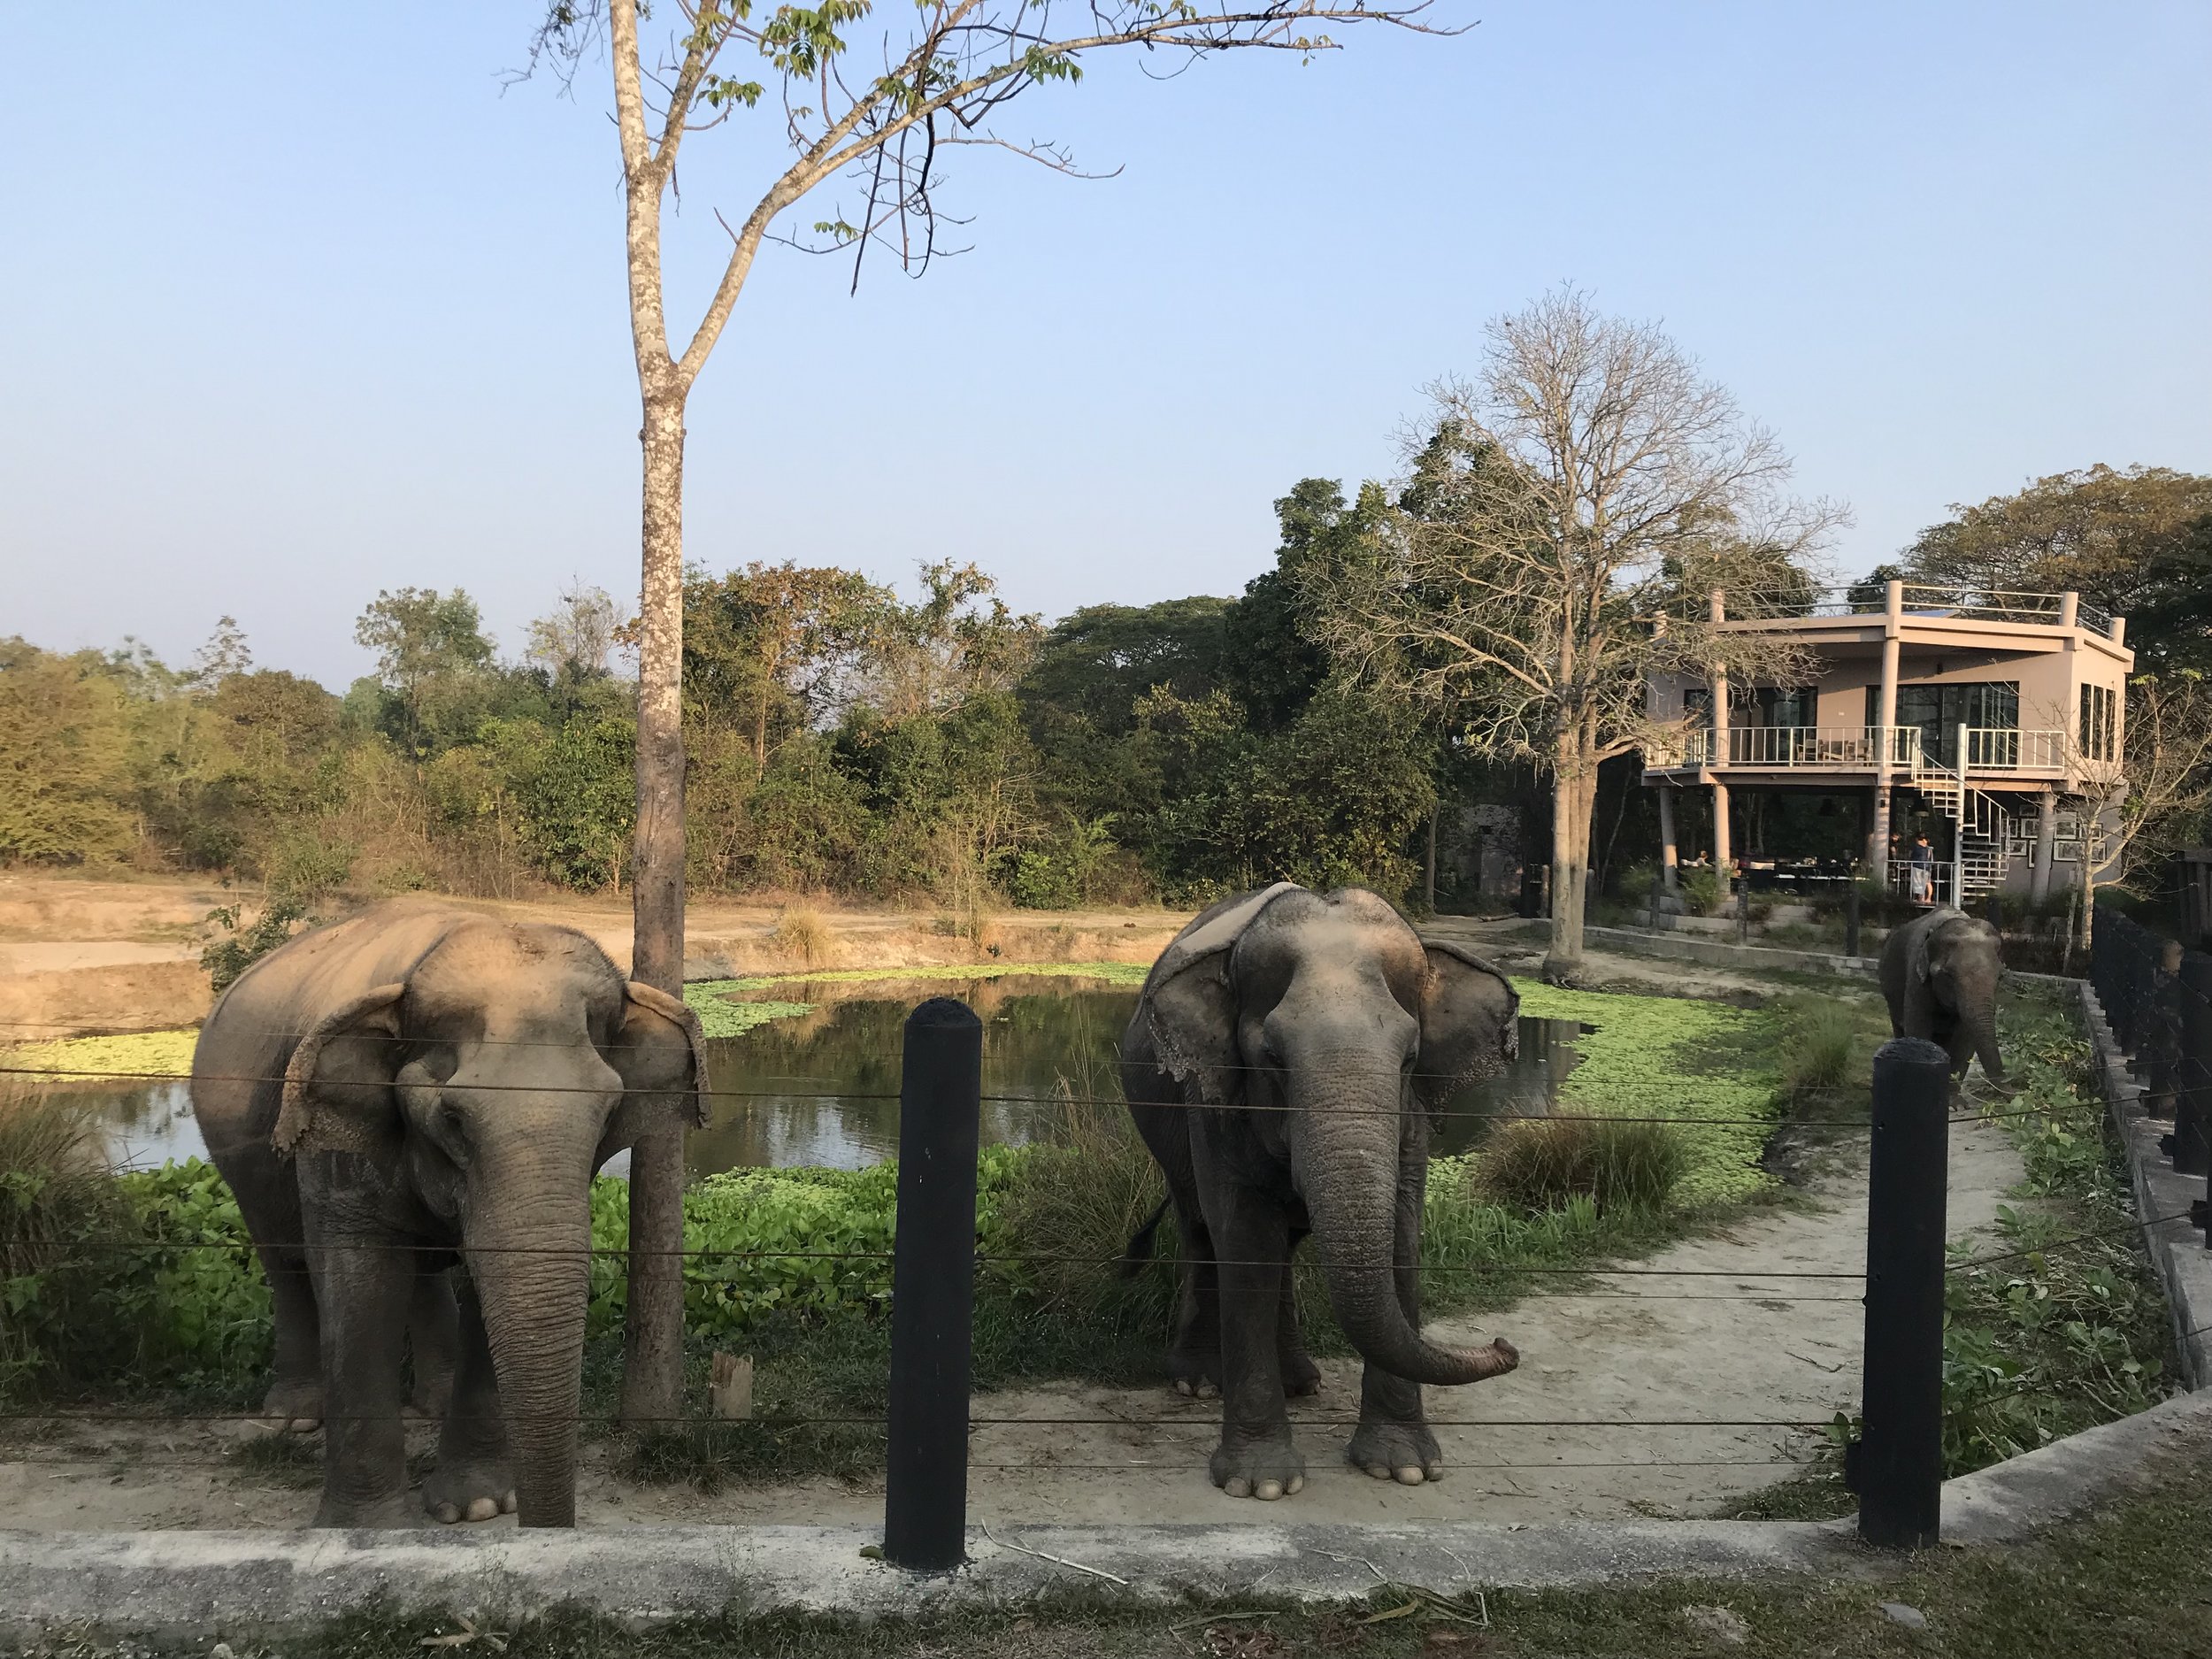 Elephants at Project 4 + WFFT's eco-lodge in the background